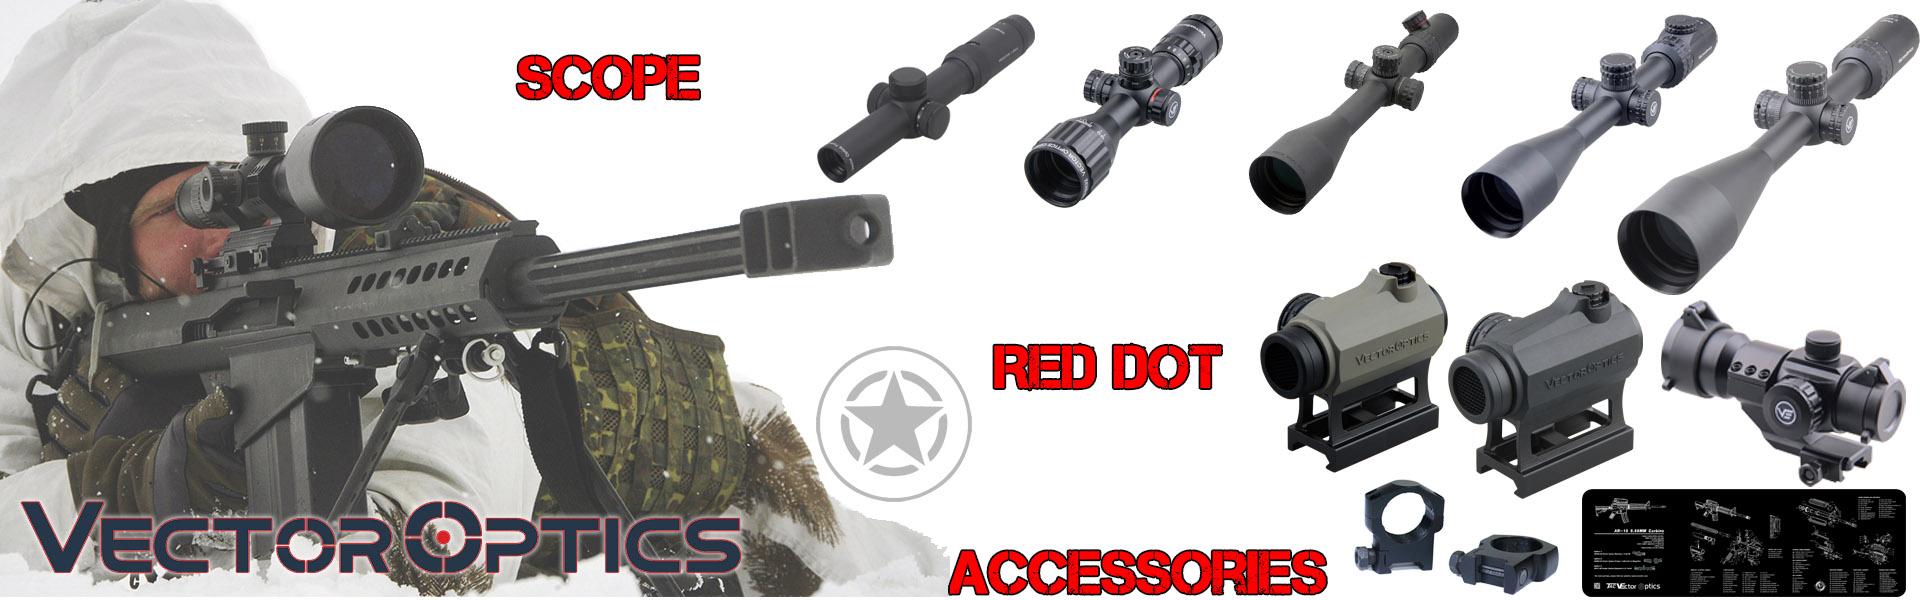 Red Dot and Scope